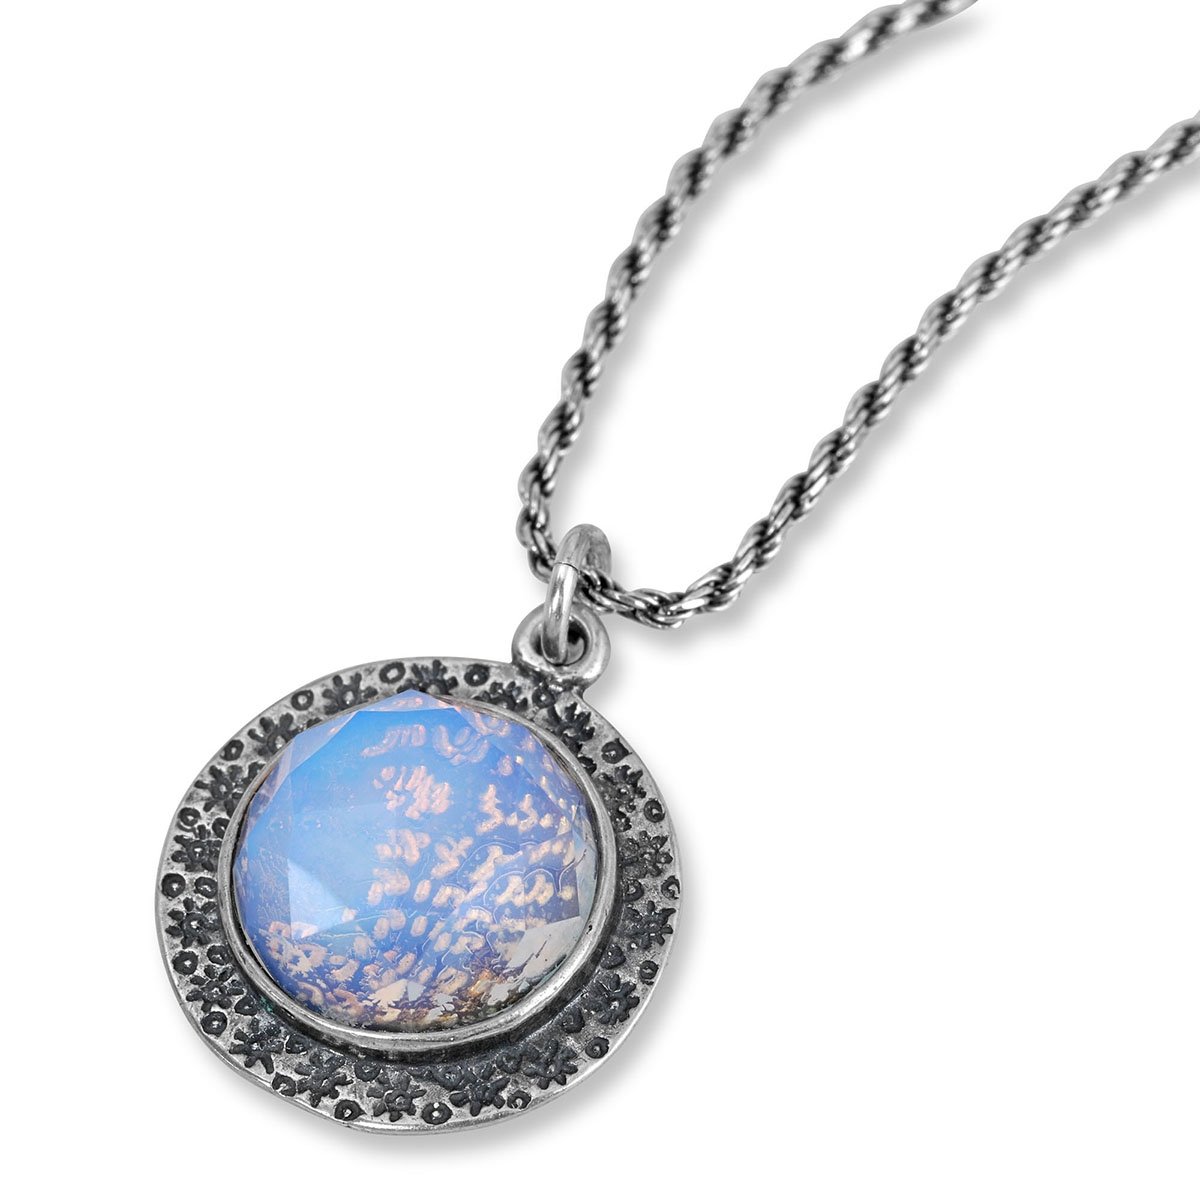 Woman of Valor: Silver Necklace with Large Opalite Stone Dome - 1